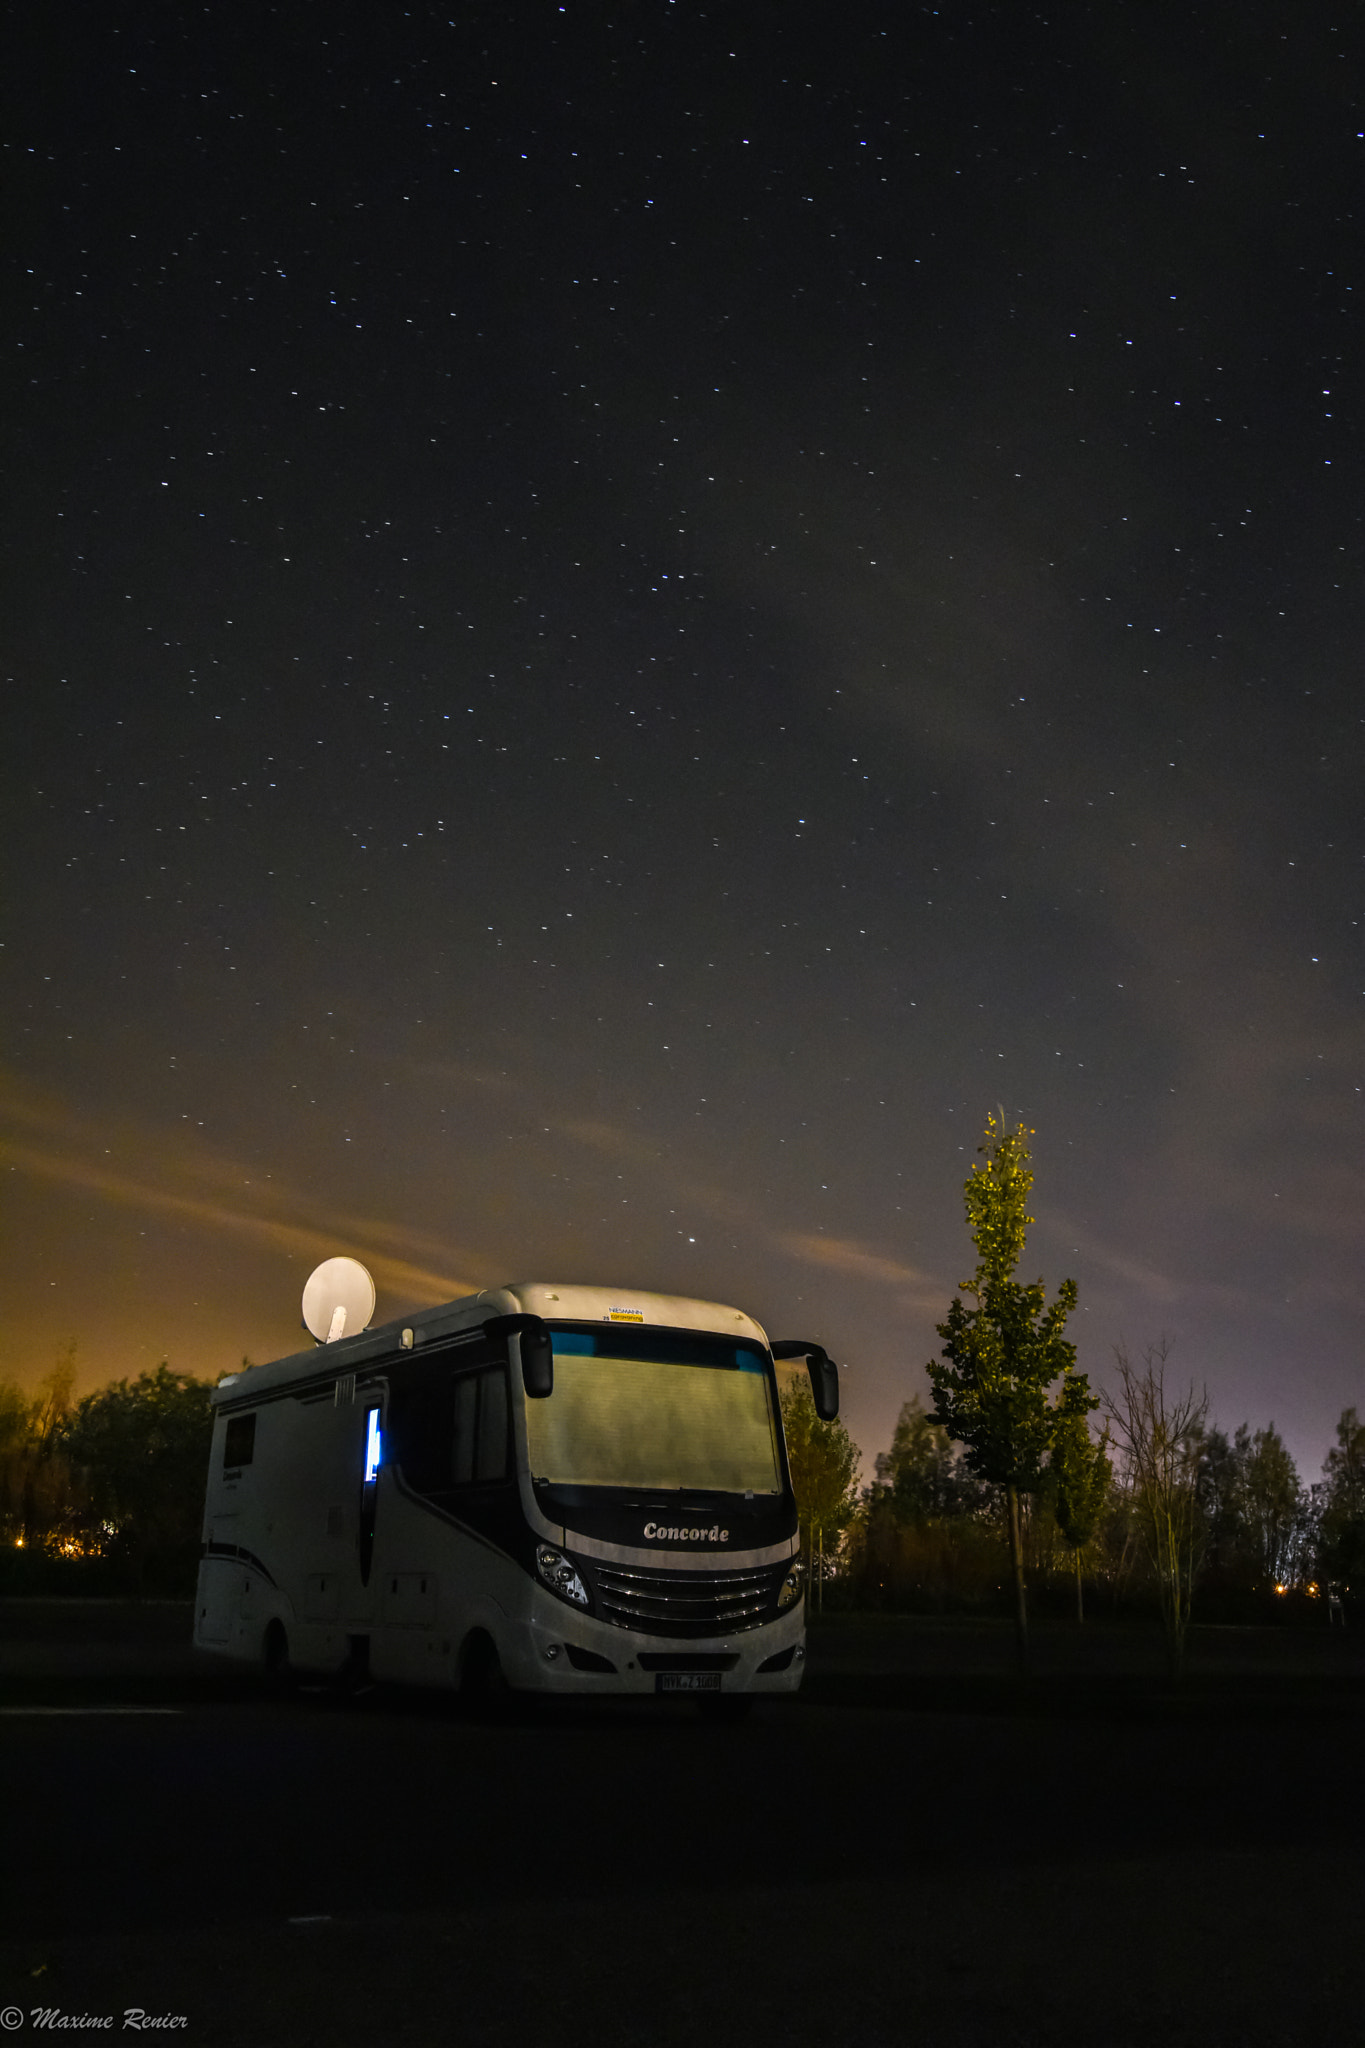 Nikon D5500 + Nikon AF-S Nikkor 20mm F1.8G ED sample photo. Camping-car concorde with the stars photography